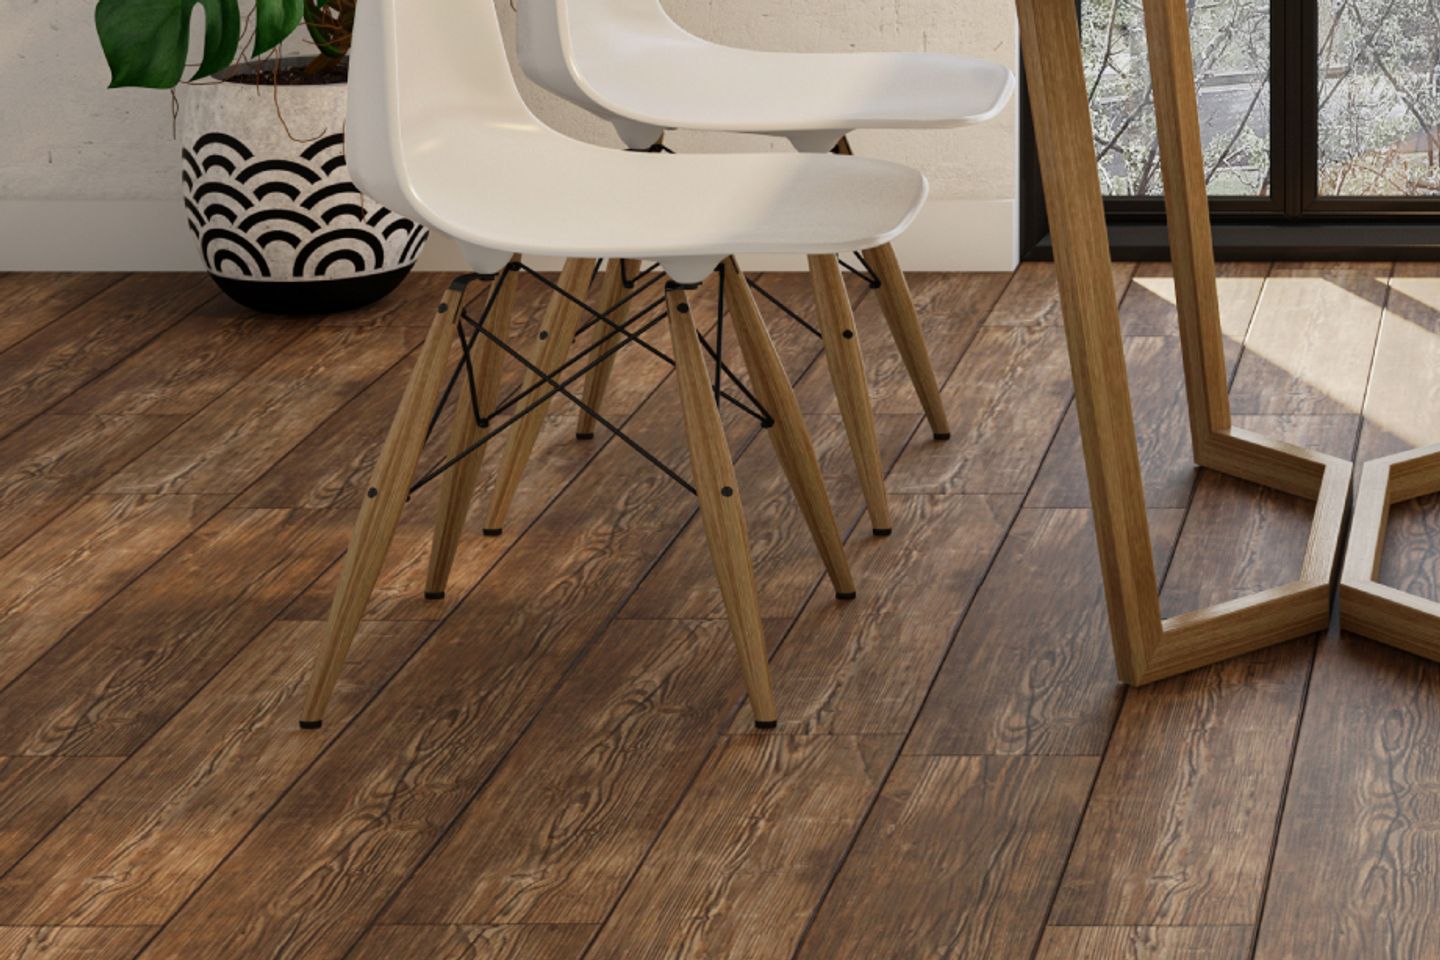 Brown Wood Flooring Design With A Matte Finish - Livspace